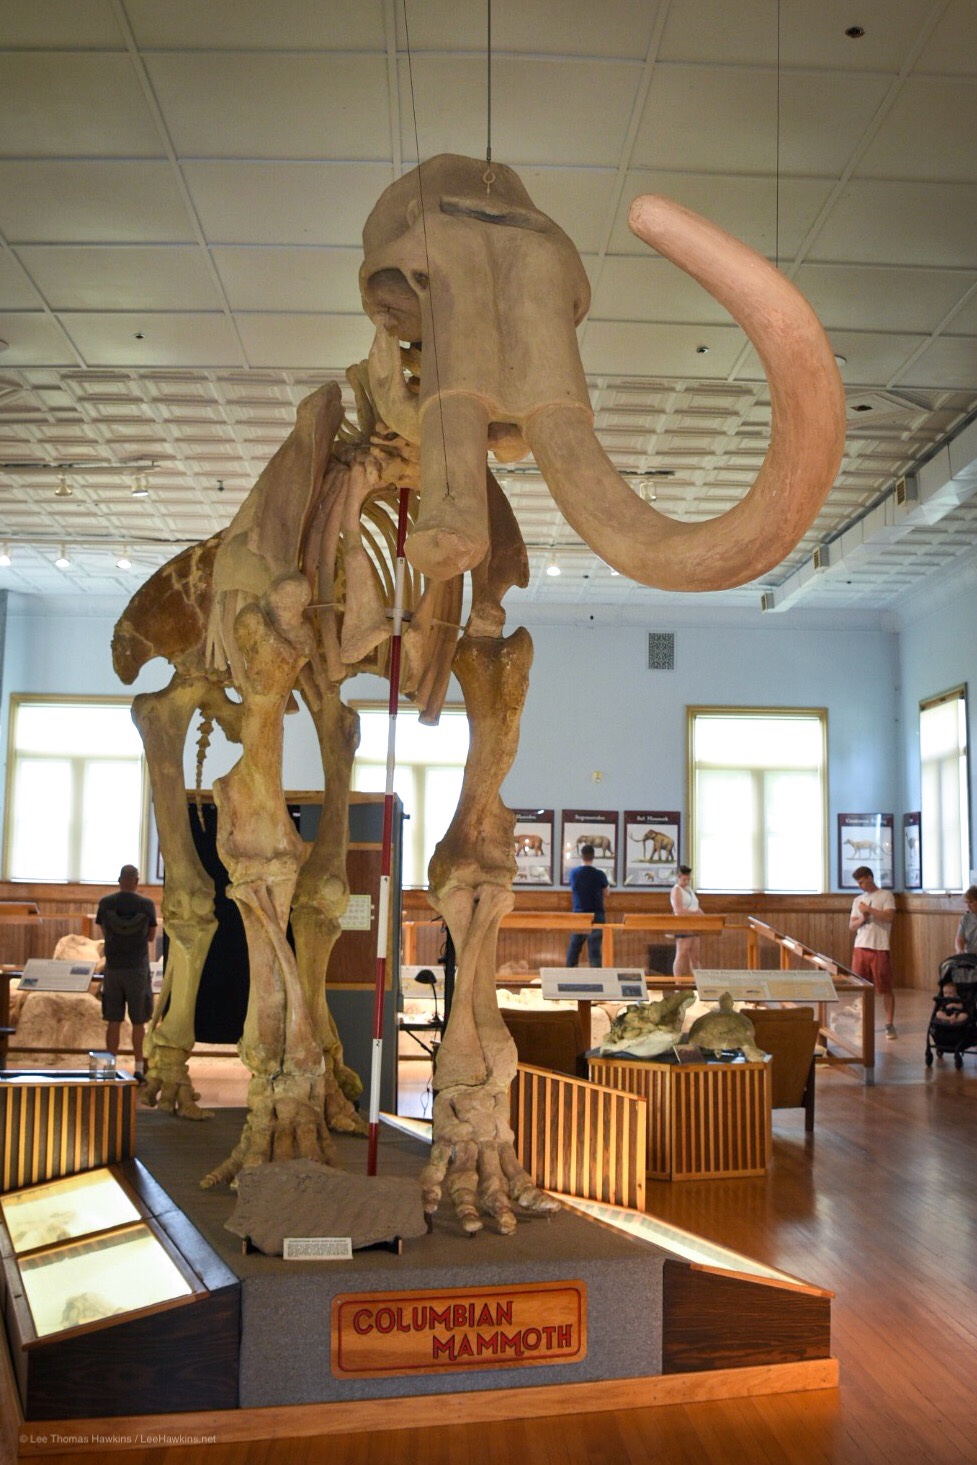 A mammoth skeleton nearly reaches the 20-foot plus ceiling in a small museum.